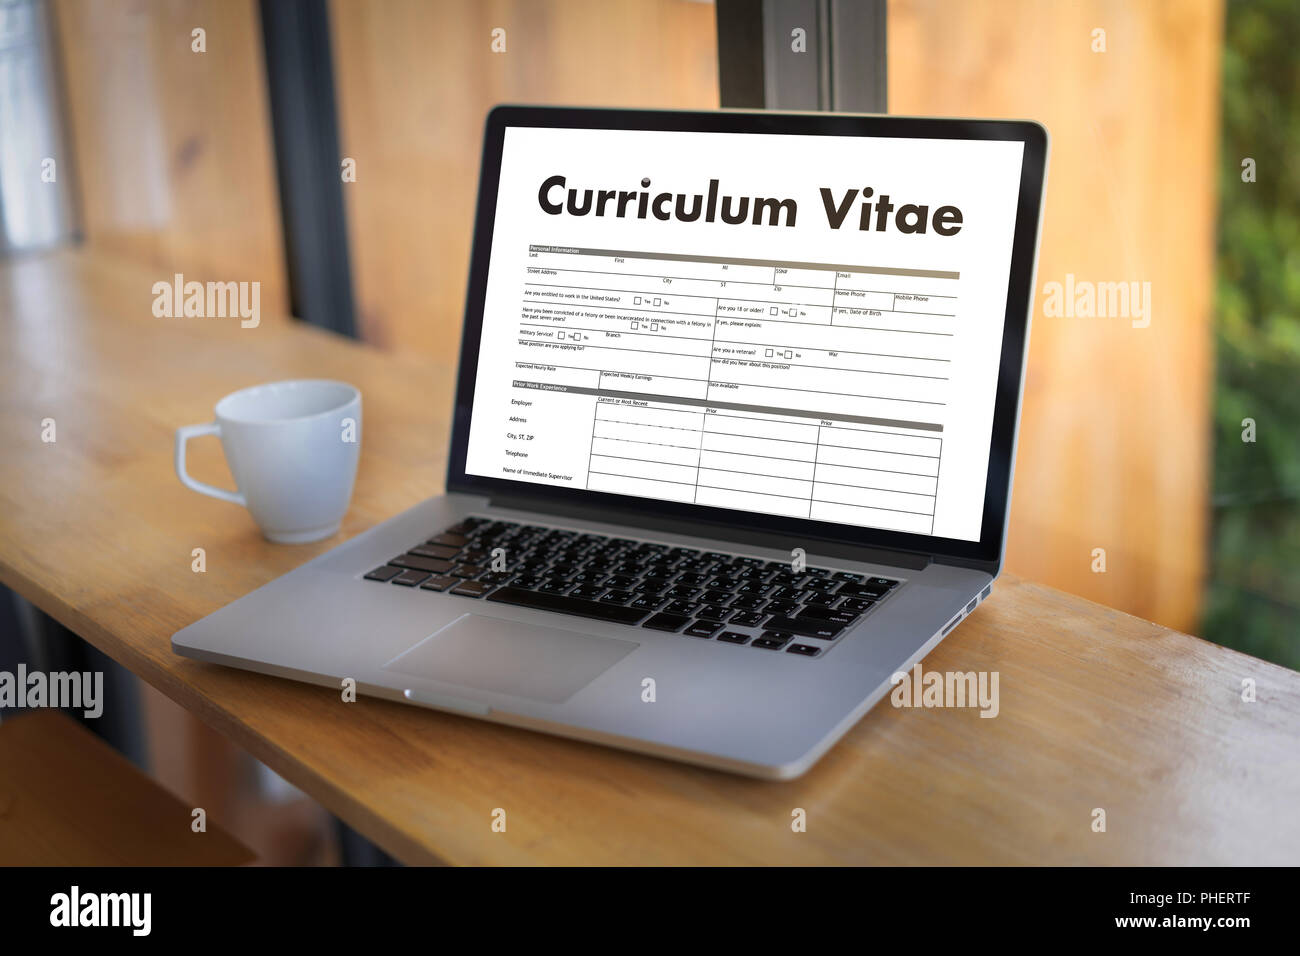 Cv Curriculum Vitae Job Interview Concept With Business Cv Resume